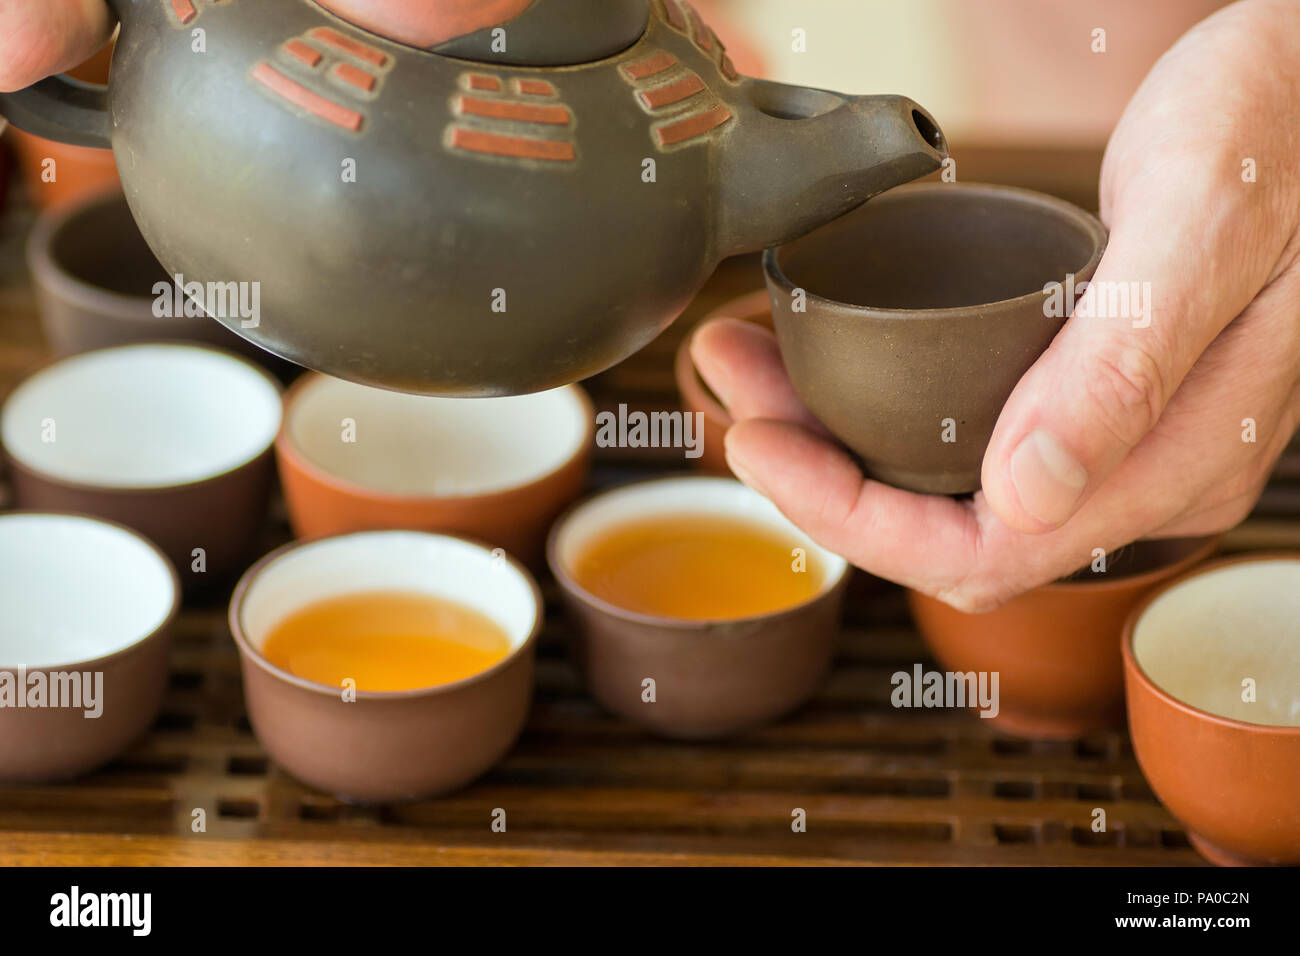 Man tea Master Host Pouring Tea into Cup from Pot at Ceremony. Chinese Japanese Set on Bamboo Wooden Tray. Freshly Brewed Beverage. Lifestyle. Wellnes Stock Photo